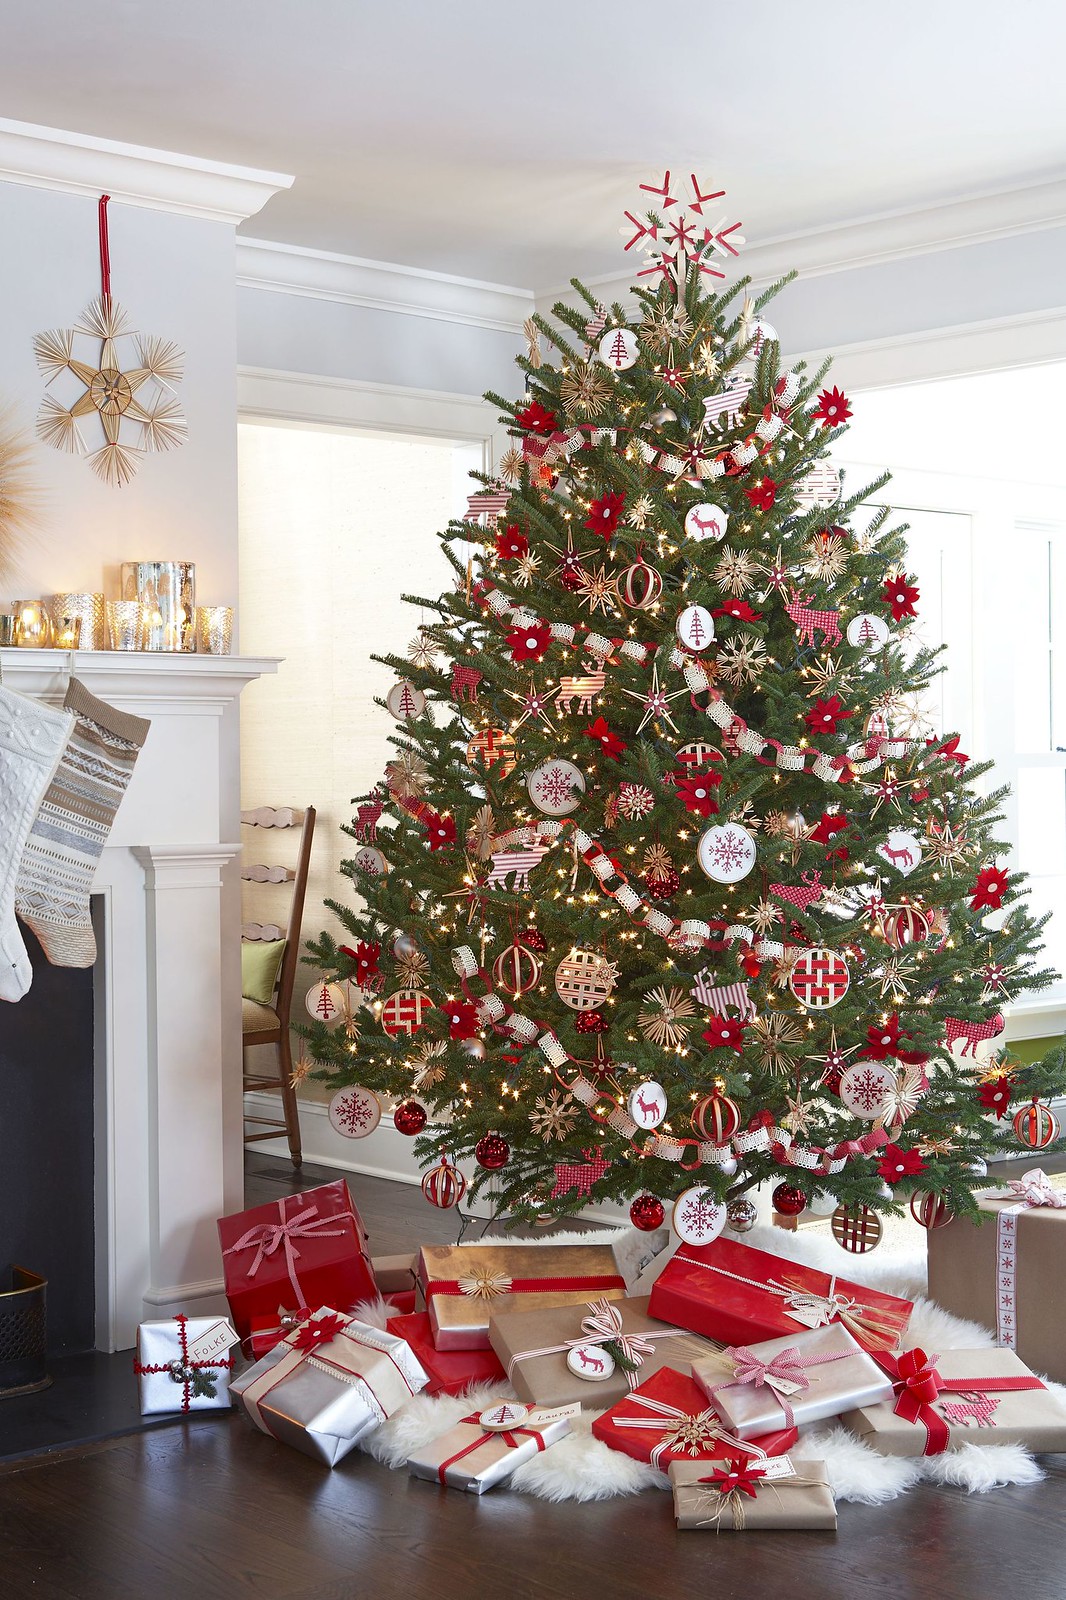 10 Ways to Decorate Your Christmas Tree - Traditional Christmas Tree